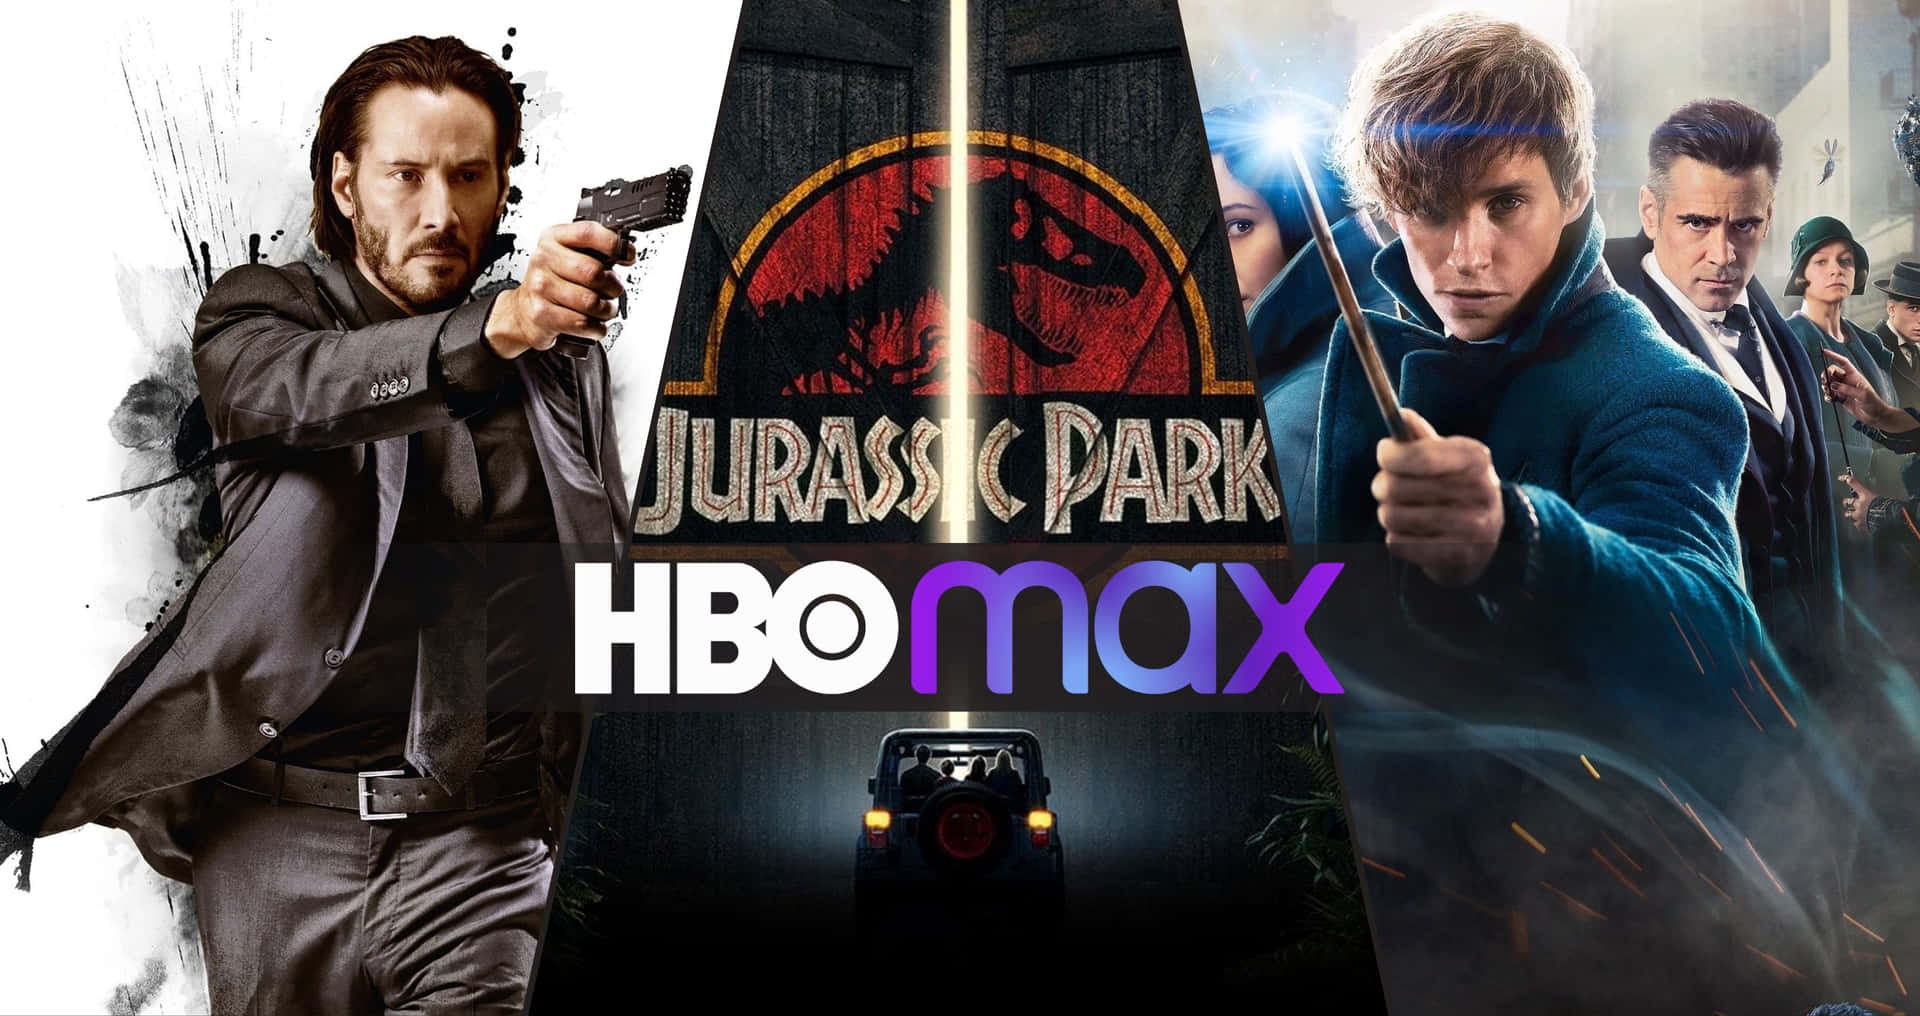 Download Hbo Max Jurassic Park Hbo Max